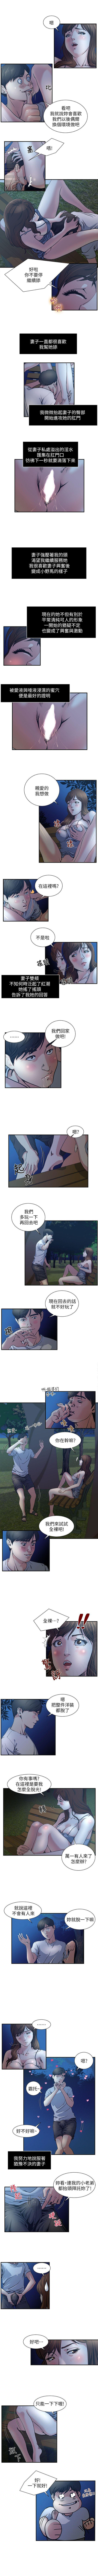 Eng Sub 癮私 1-72 Orgame - Page 6